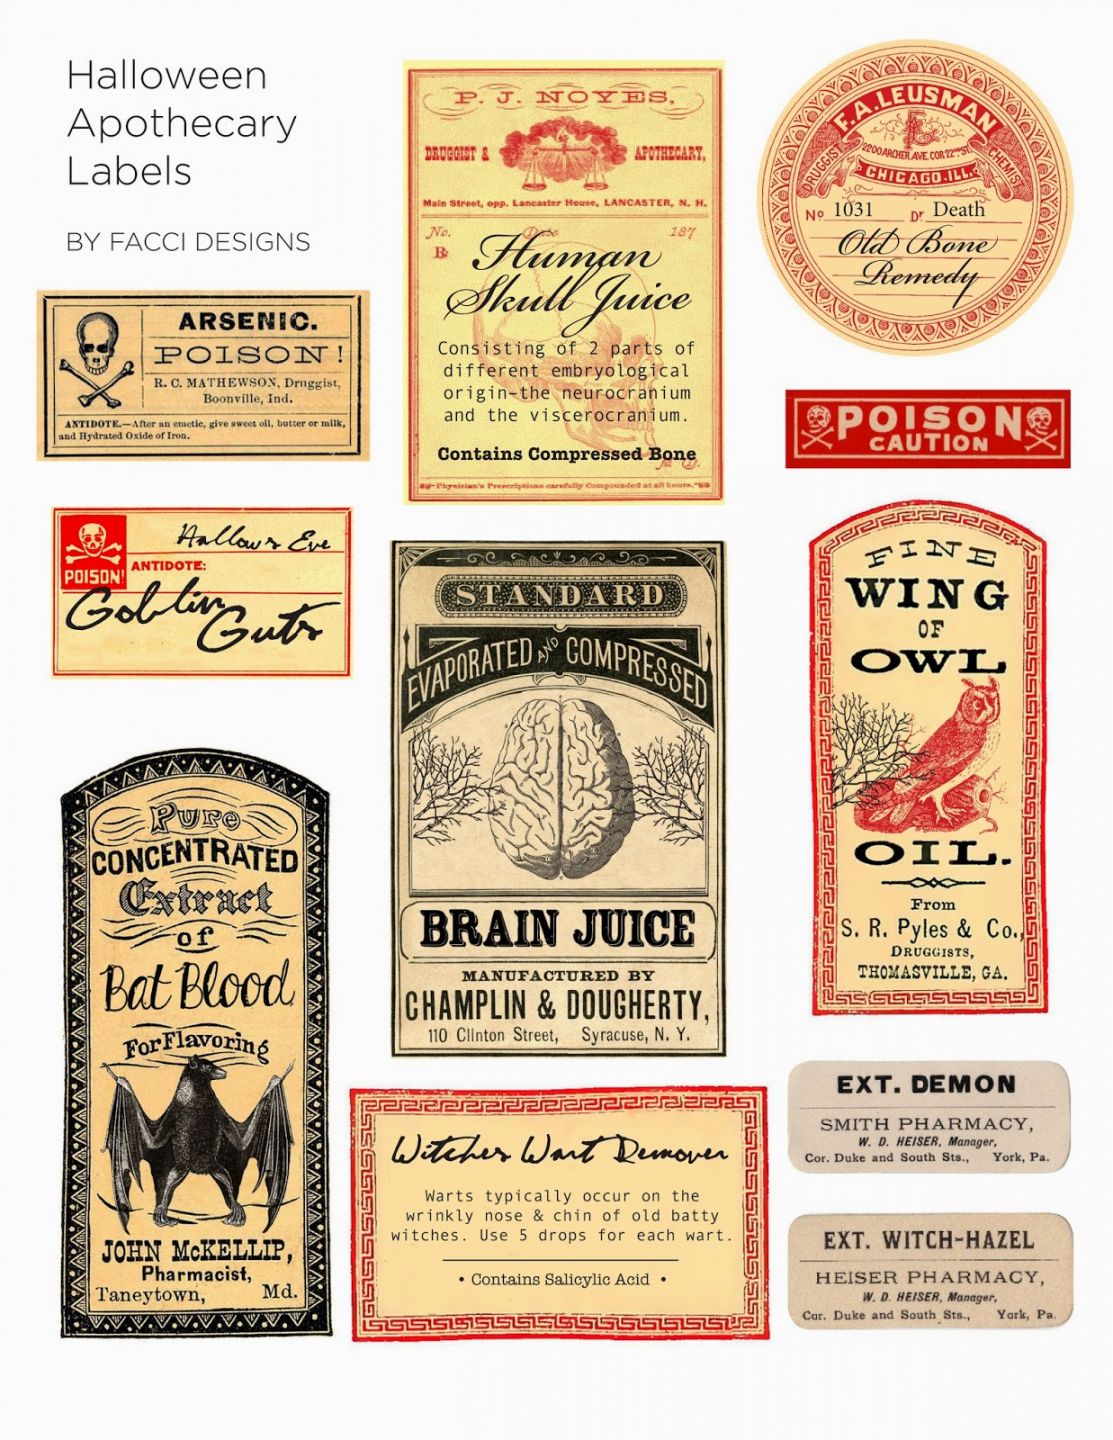 Halloween Love: Spooky Apothecary Labels Free Printable  Brooklyn  - FREE Printables - Free Printable Halloween Apothecary Labels